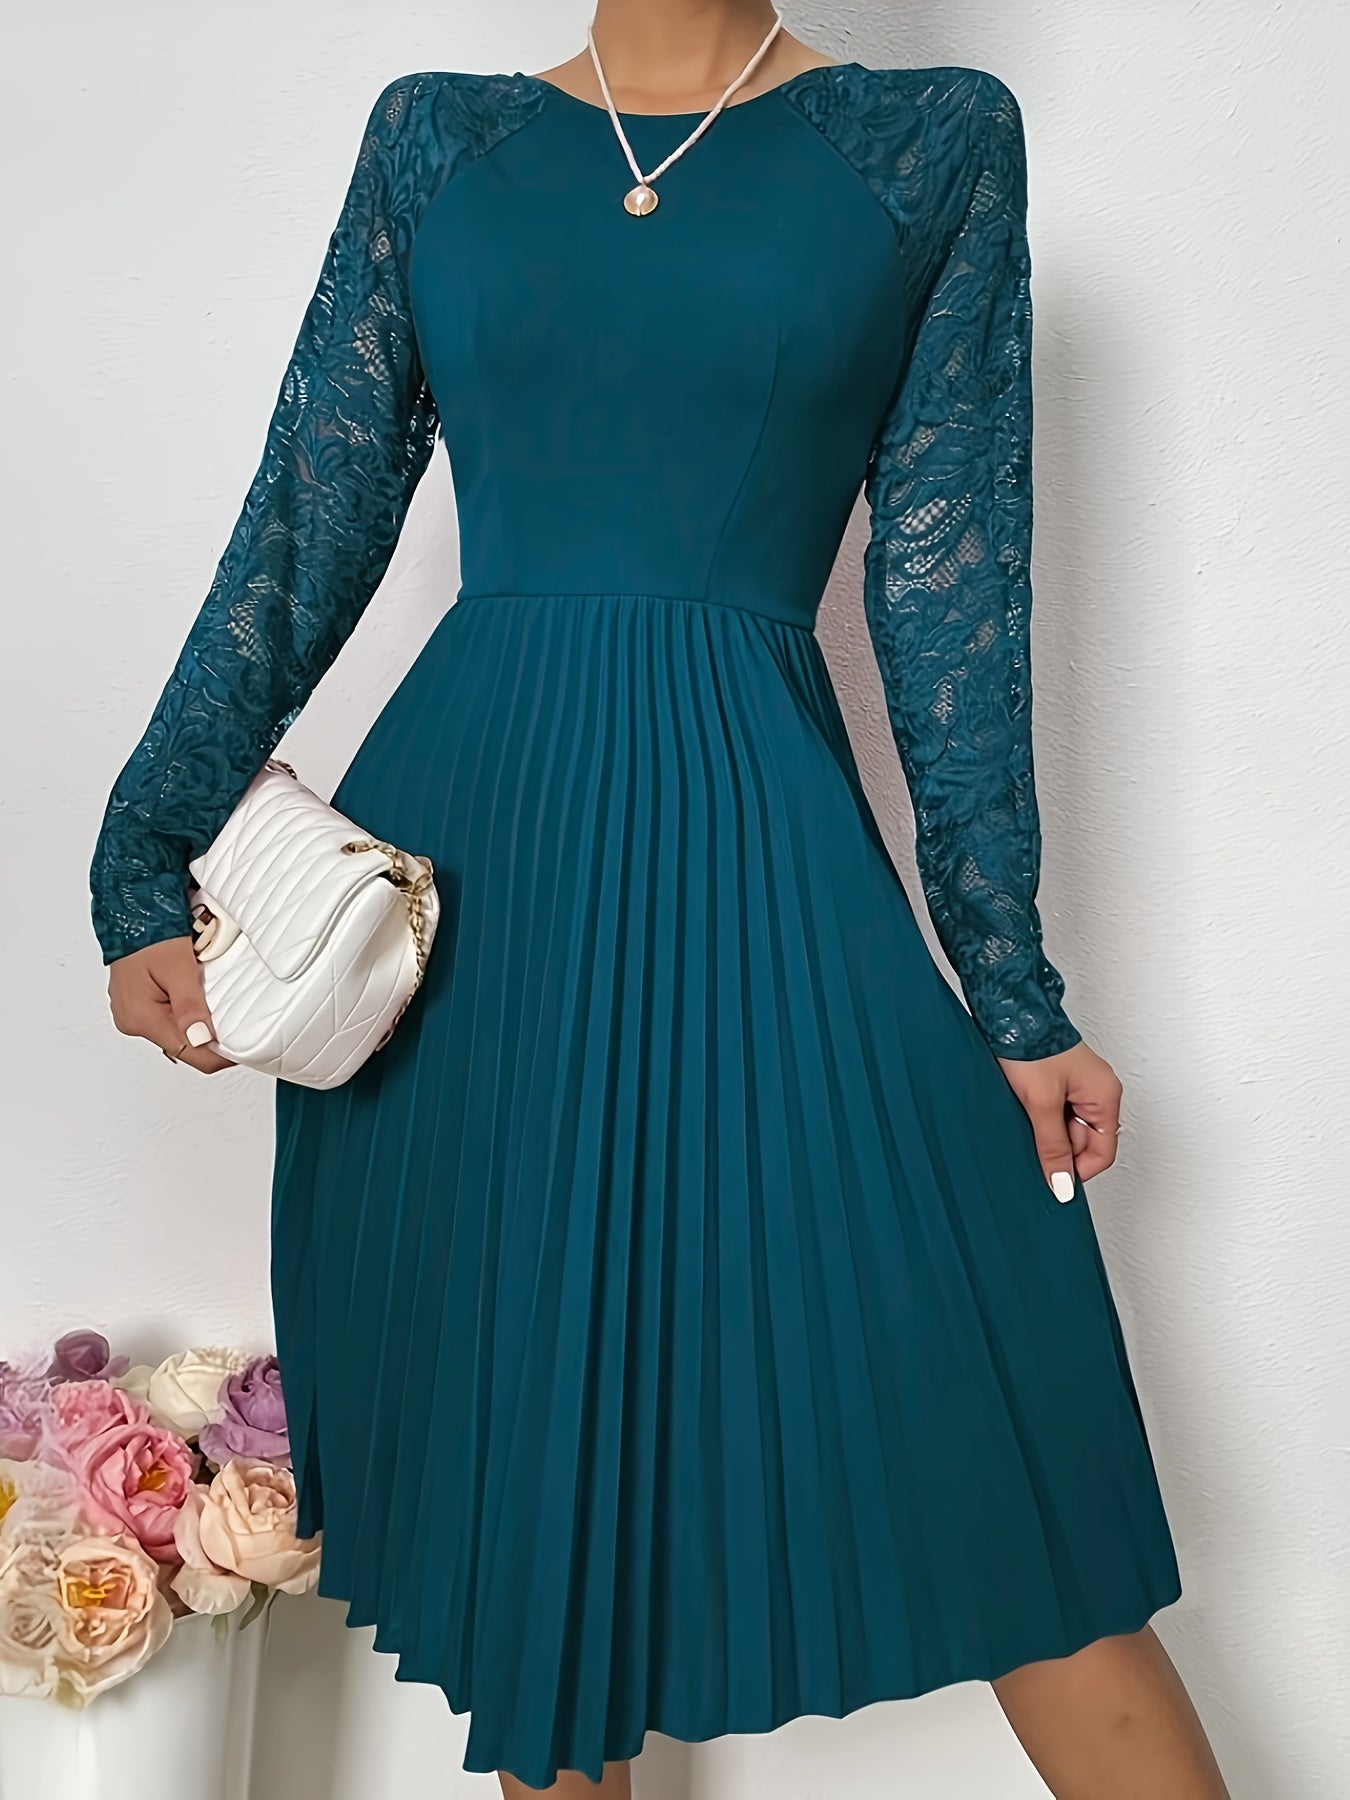 xieyinshe  Pleated Contrast Lace Dress, Elegant Long Sleeve Dress For Party & Banquet, Women's Clothing